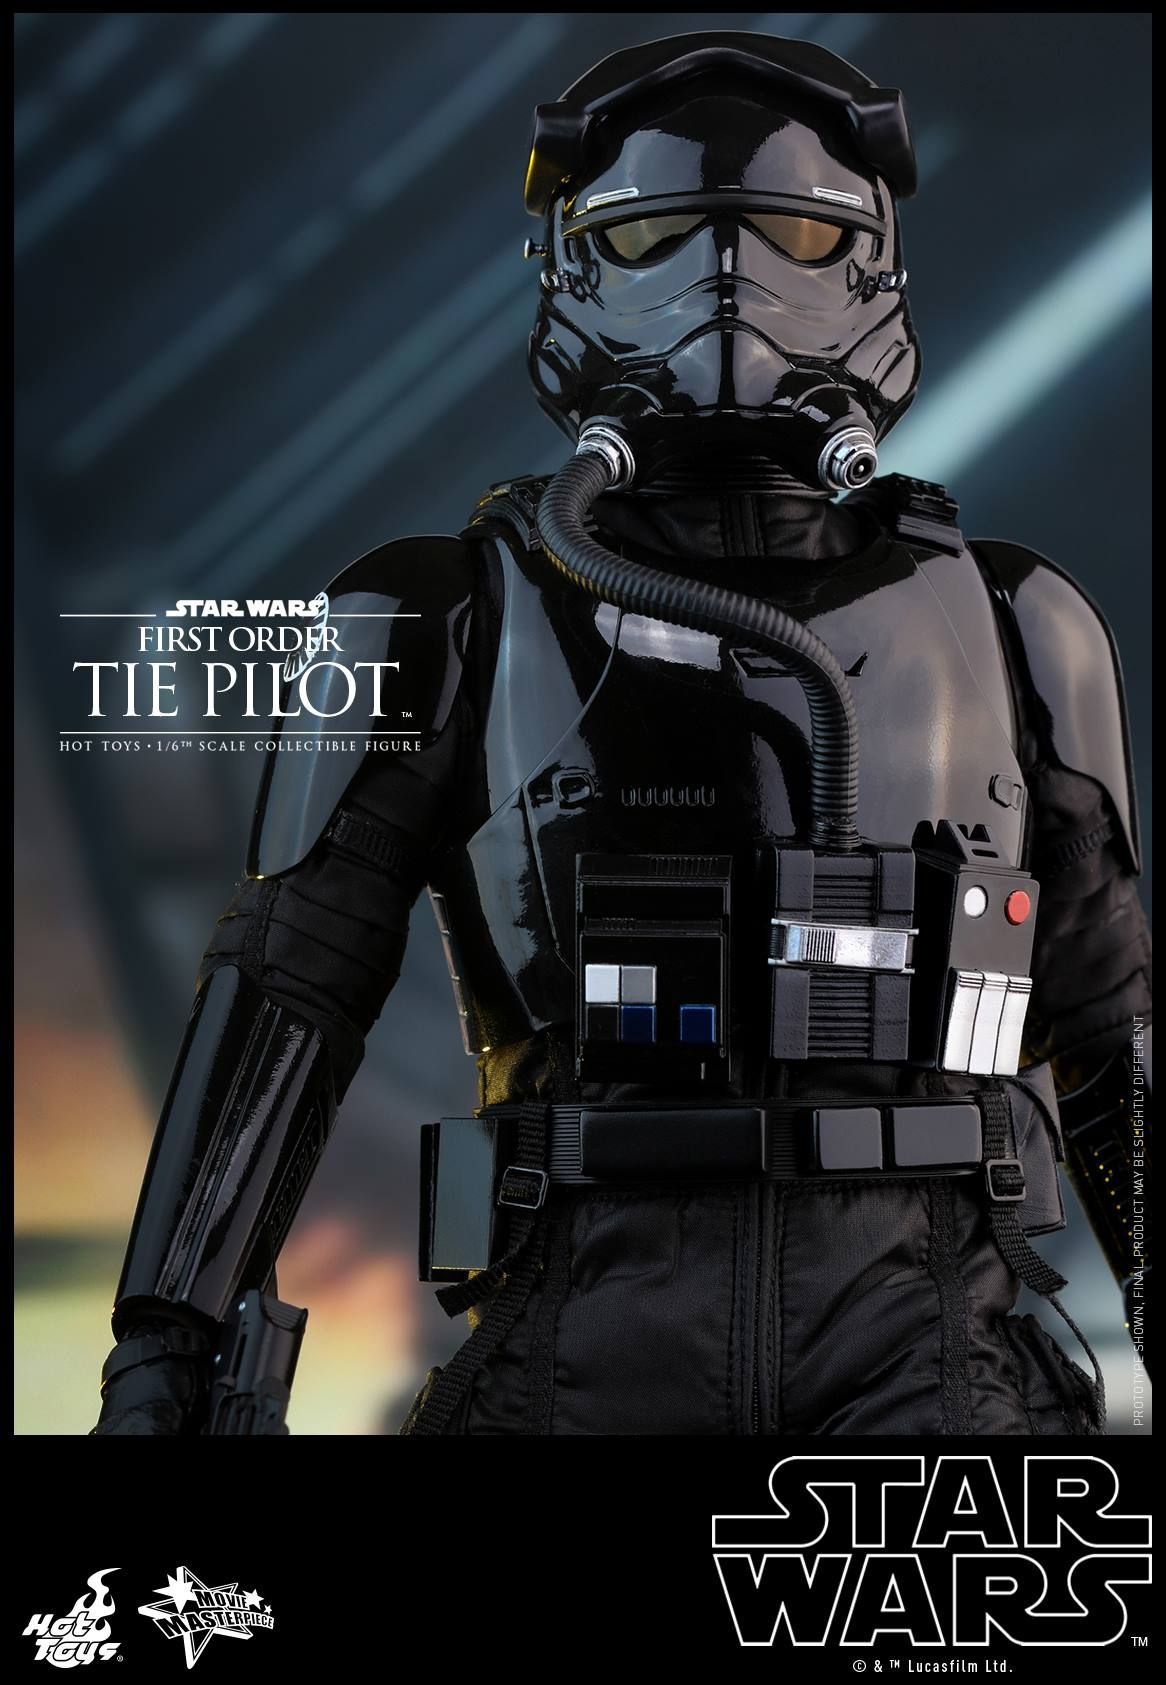 First Order Tie Pilot Hot Toy from Star Wars: The Force Awakens. Star wars legacy, Star wars trooper, Star wars